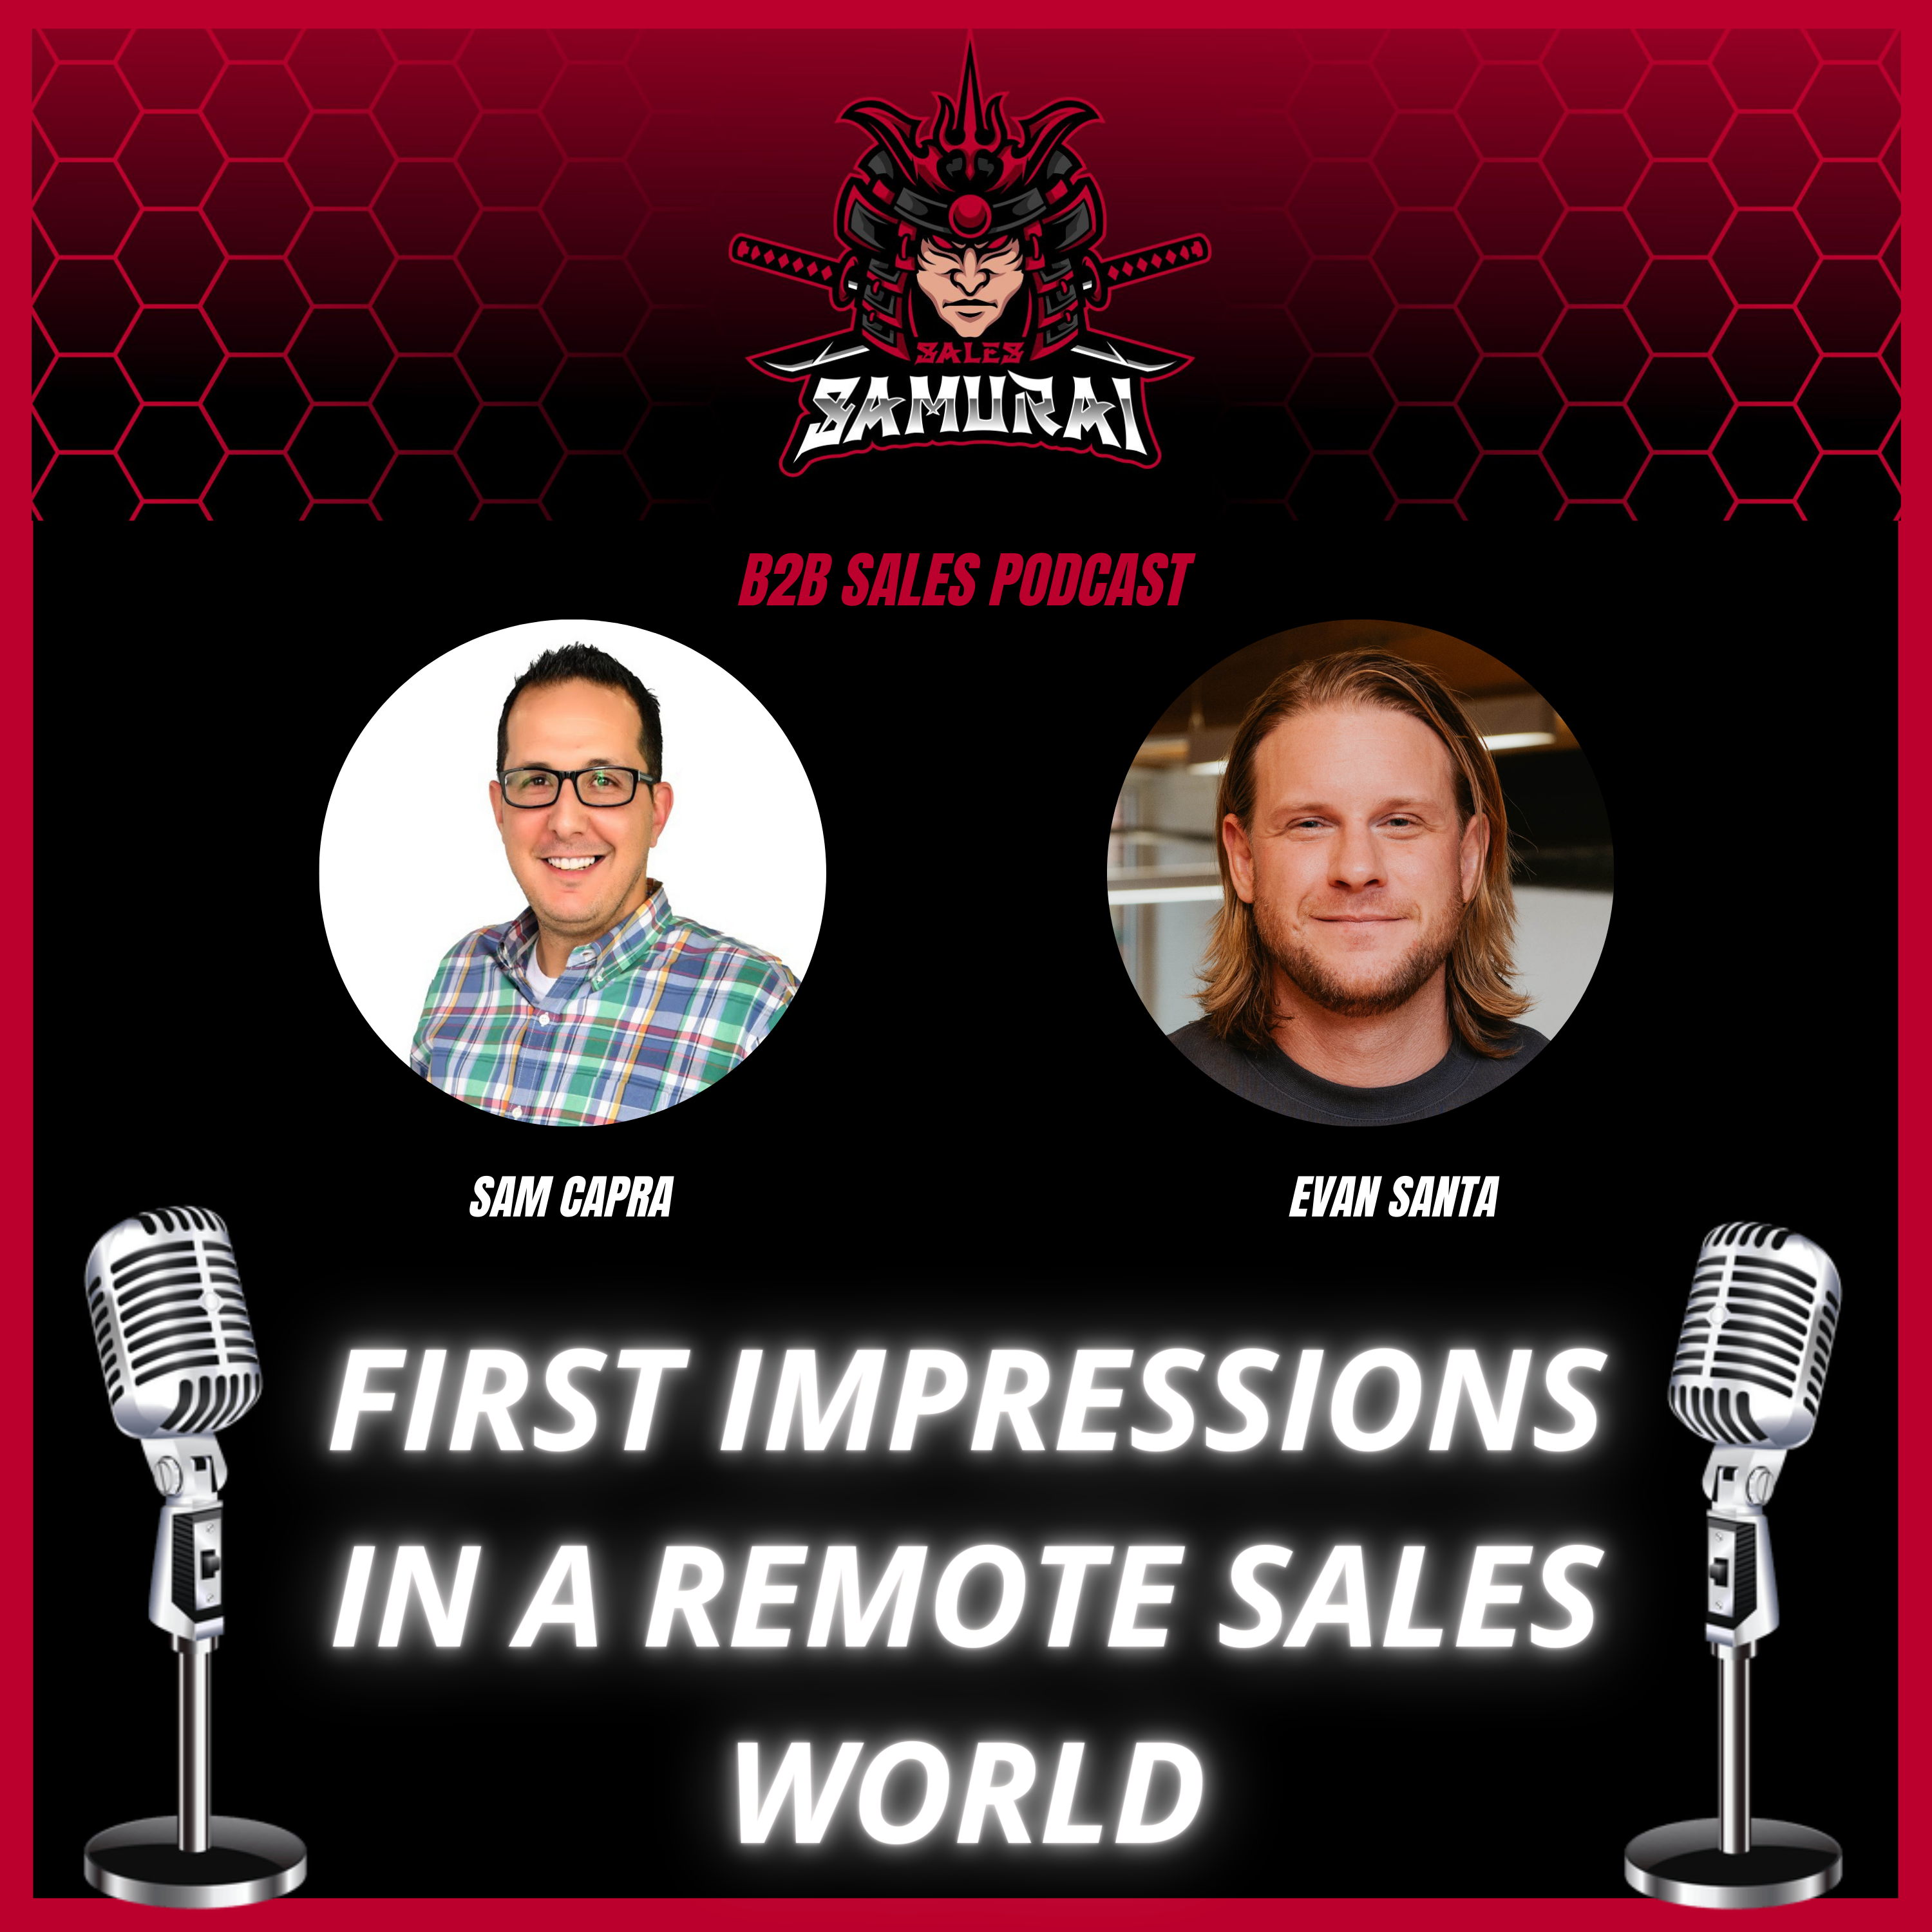 First Impression in a Remote Sales World Image